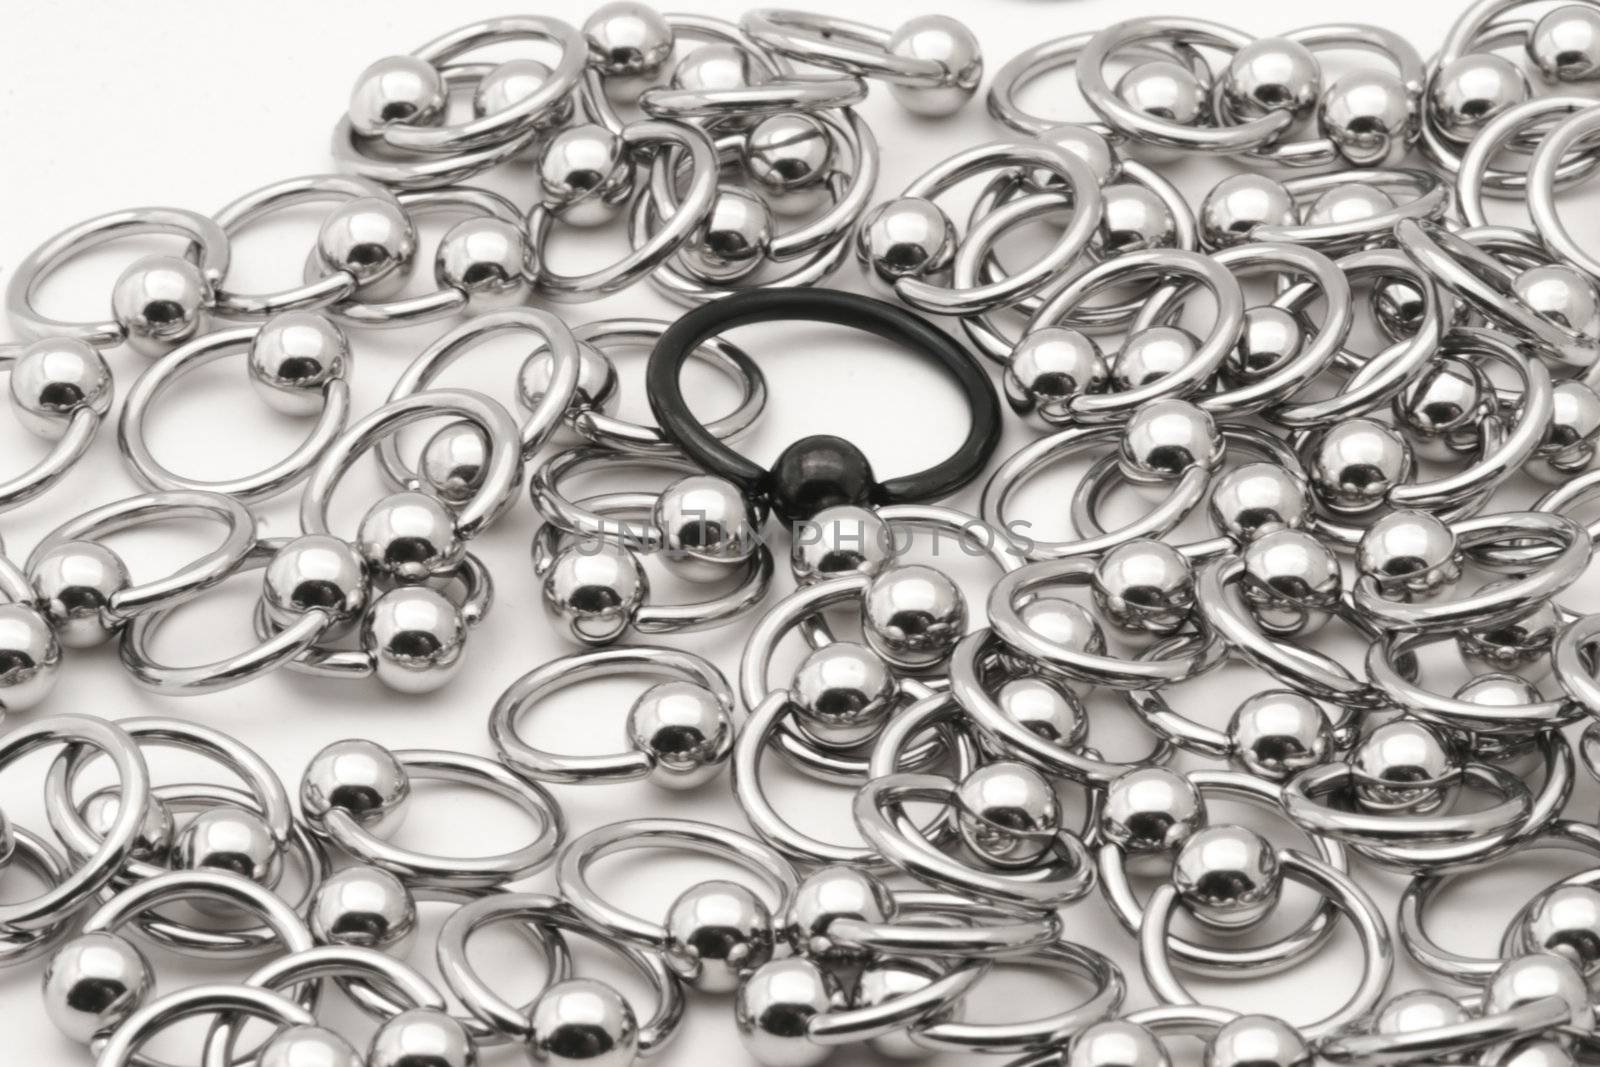 Lynching the Outsider. A lone black captive ring is surrounded by silver rings.